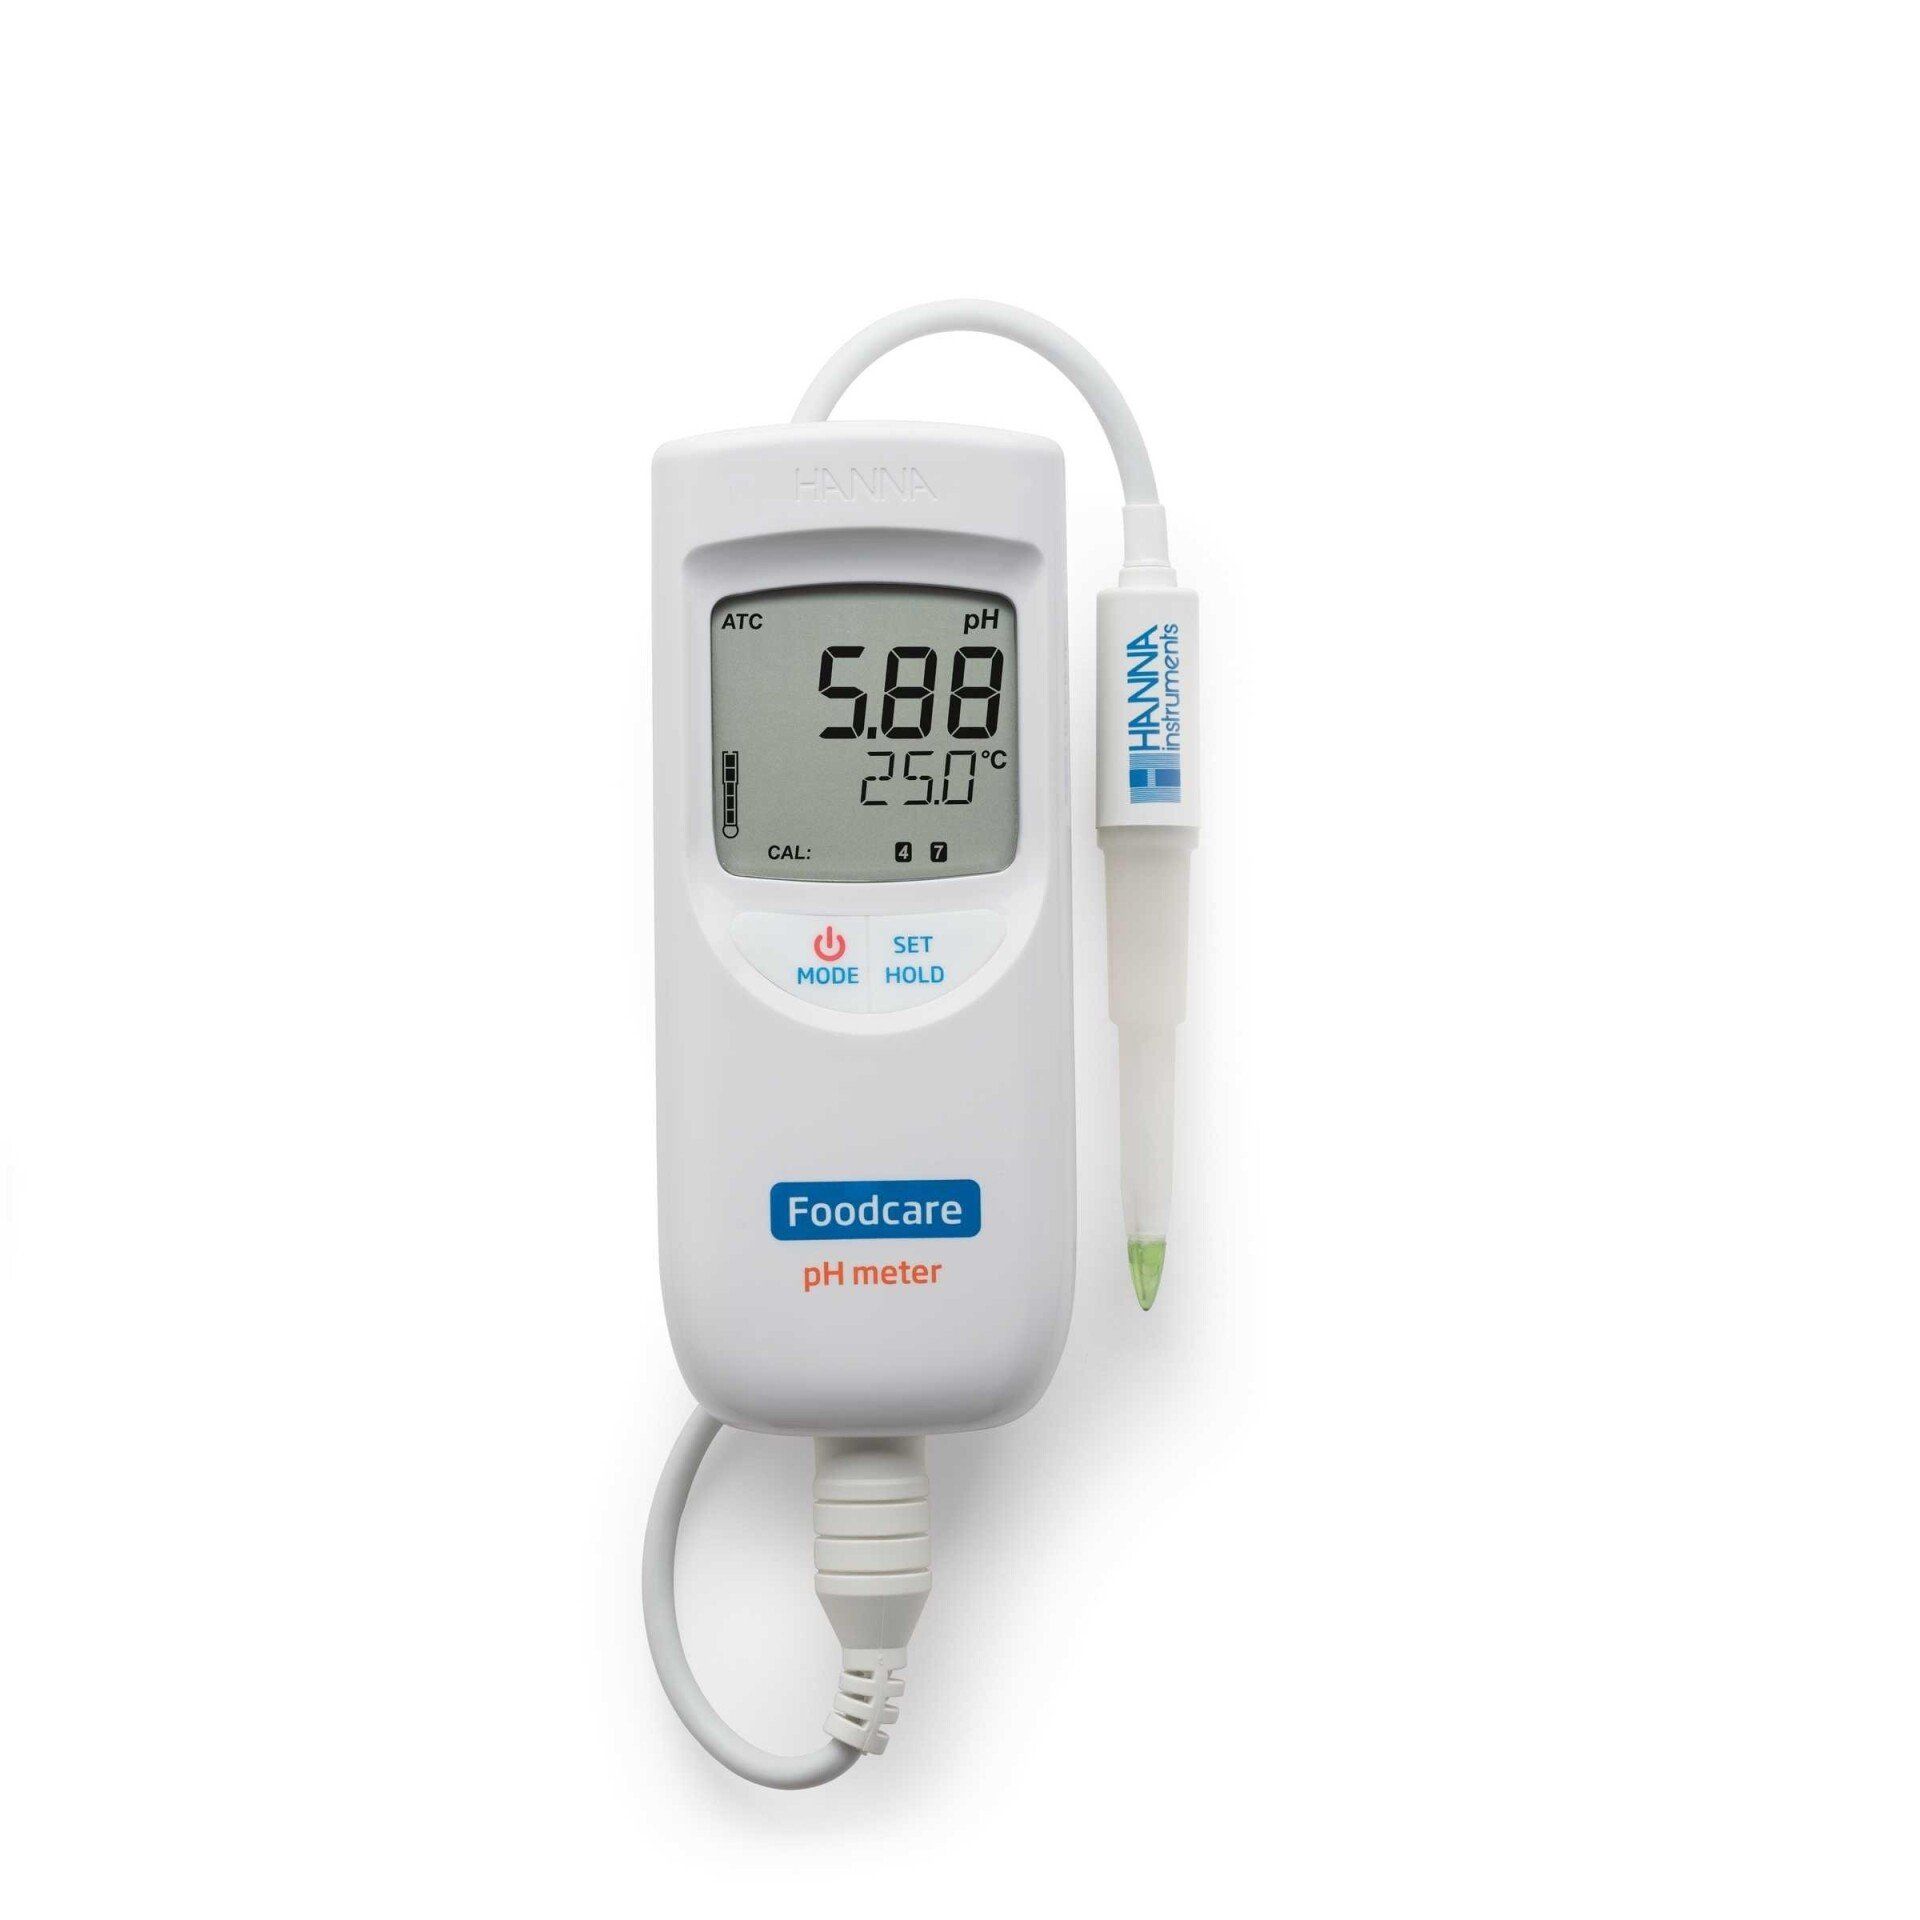 pH Diary & Food Meter for testing pH levels in cheese, milk, yoghurt and food production